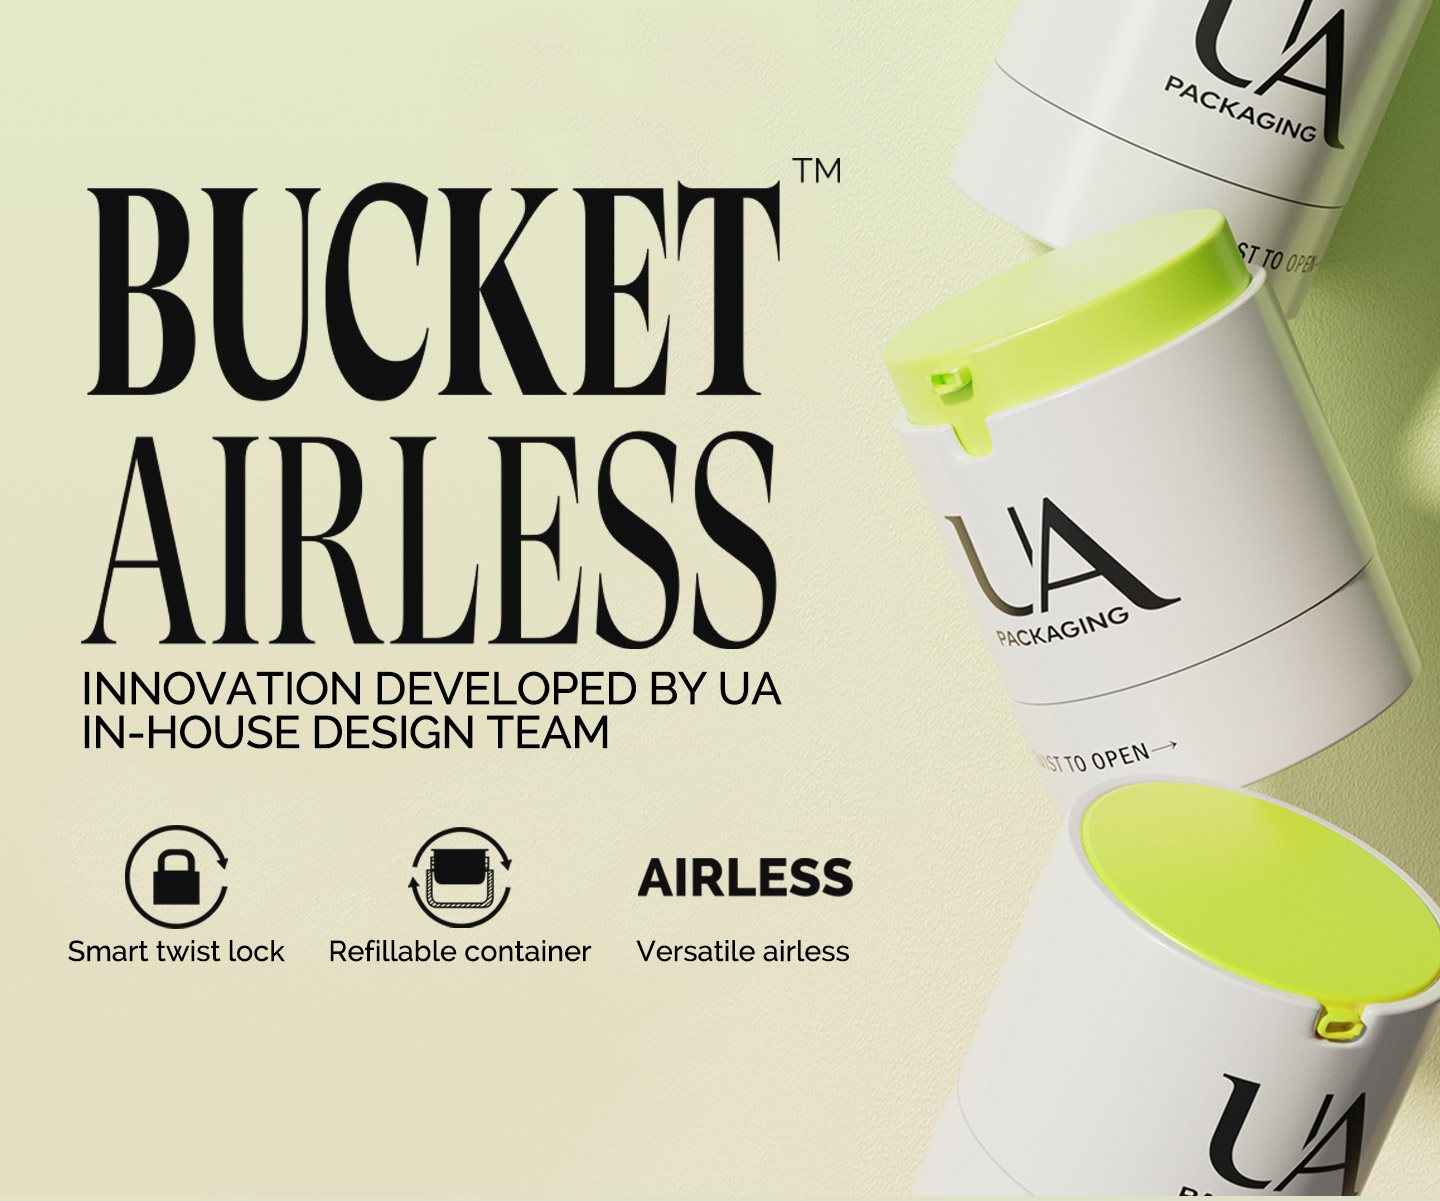 Bucket Airless: Innovation developed by UA in-house design team